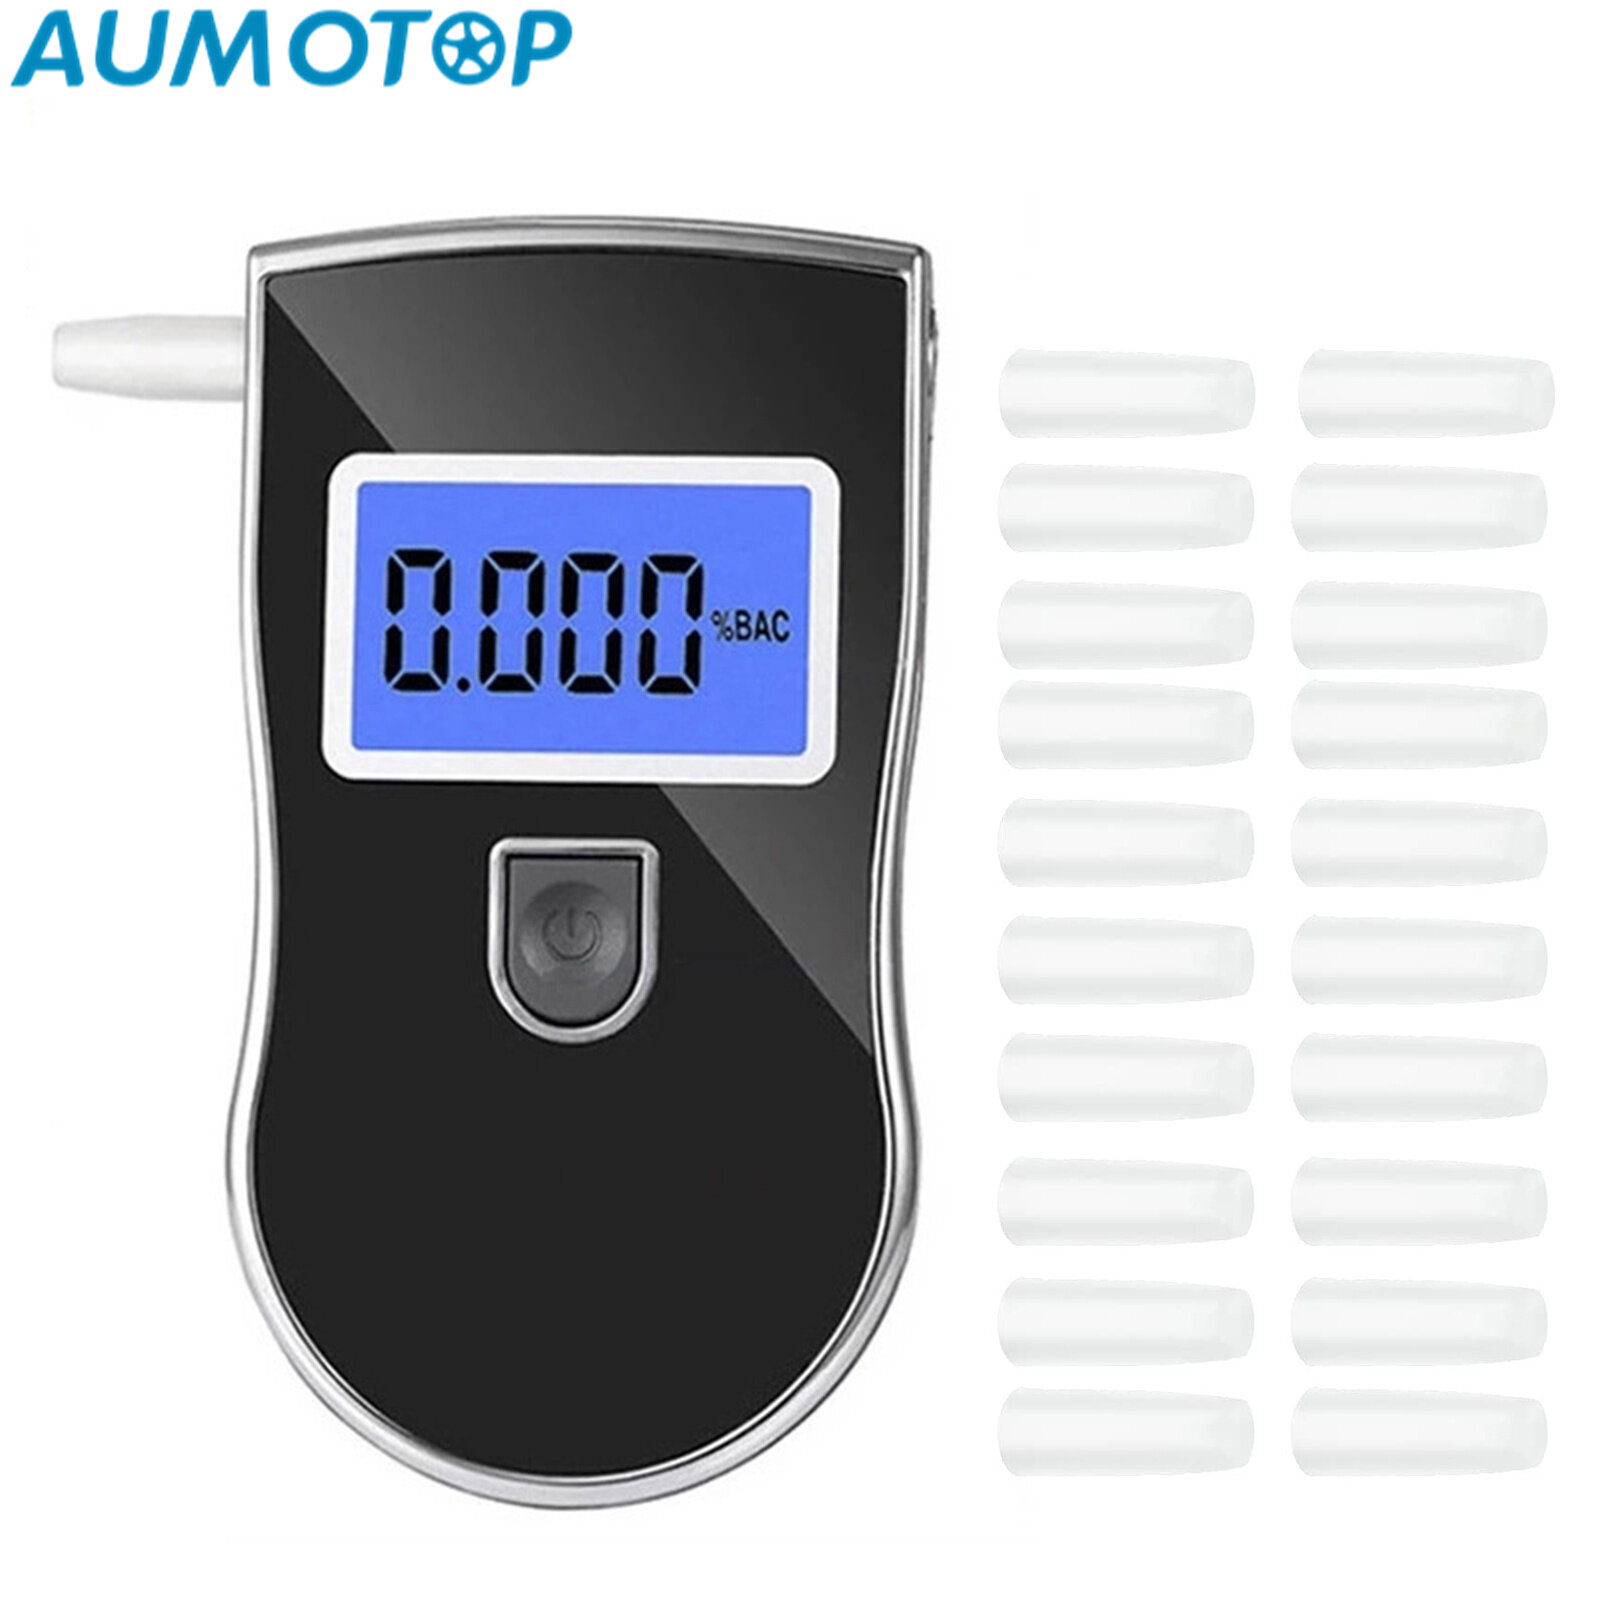 Alco-hol Tester, Handheld Breathalyzer with Blue Backlight LCD Screen